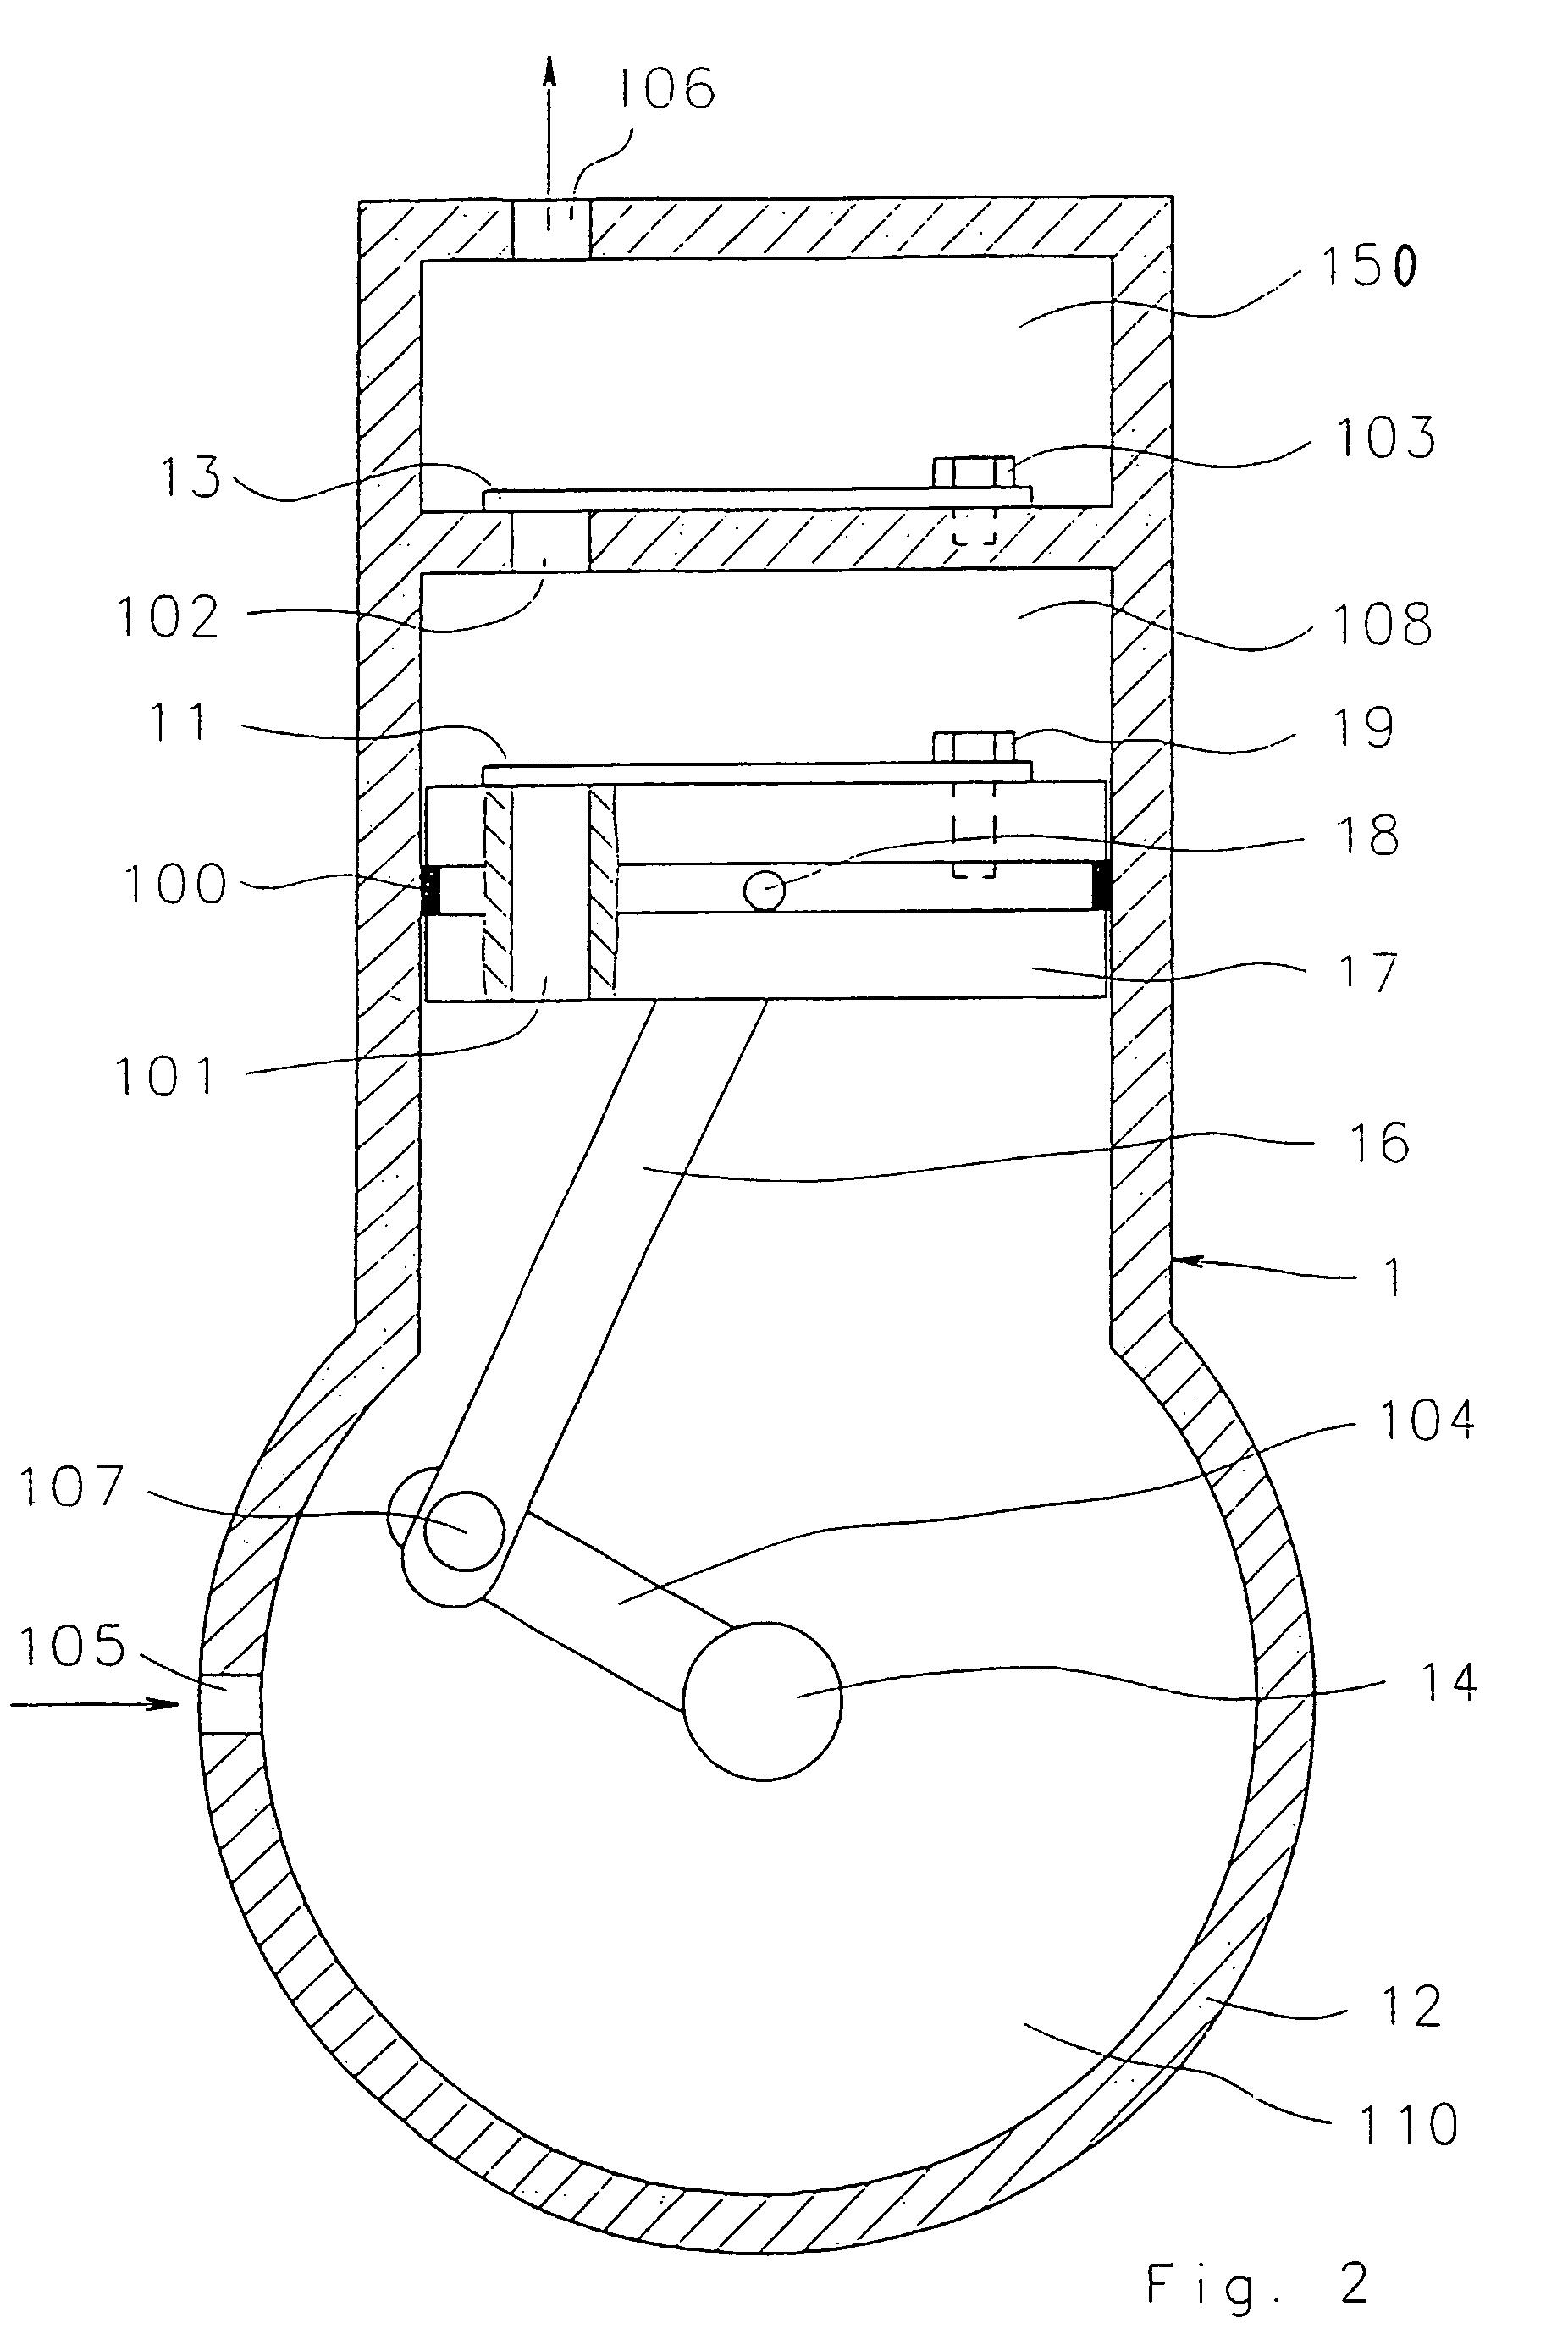 Pneumatic suspension system for a vehicle